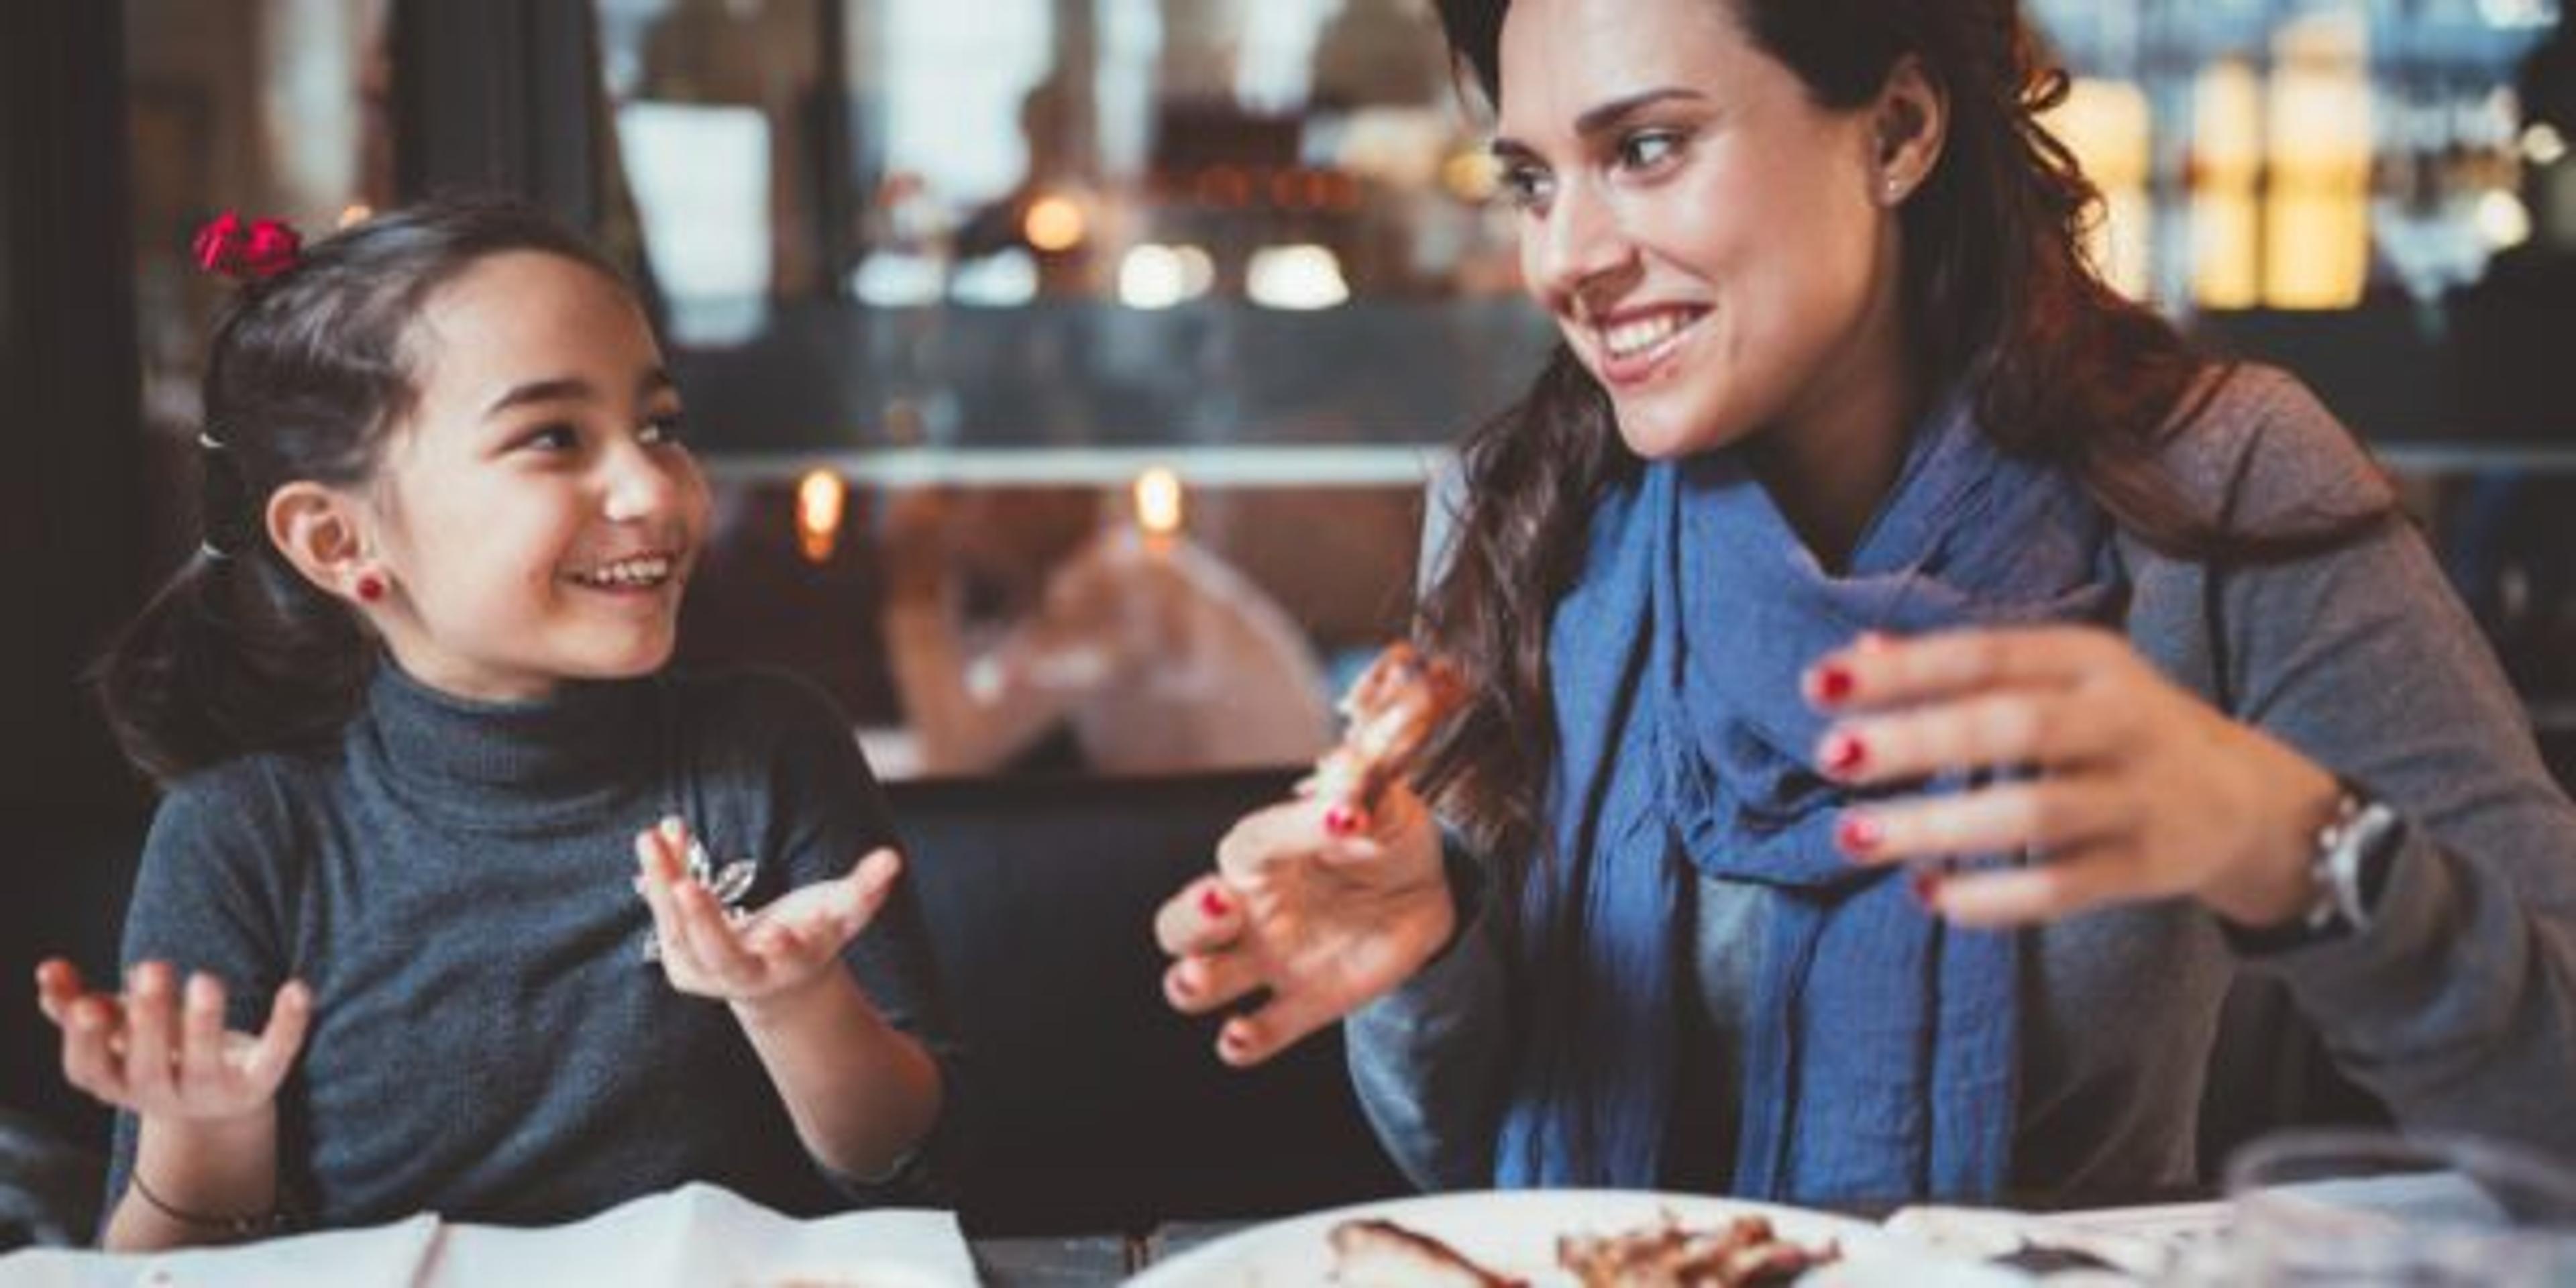 A mother and daughter enjoy a meal of chicken wings together.